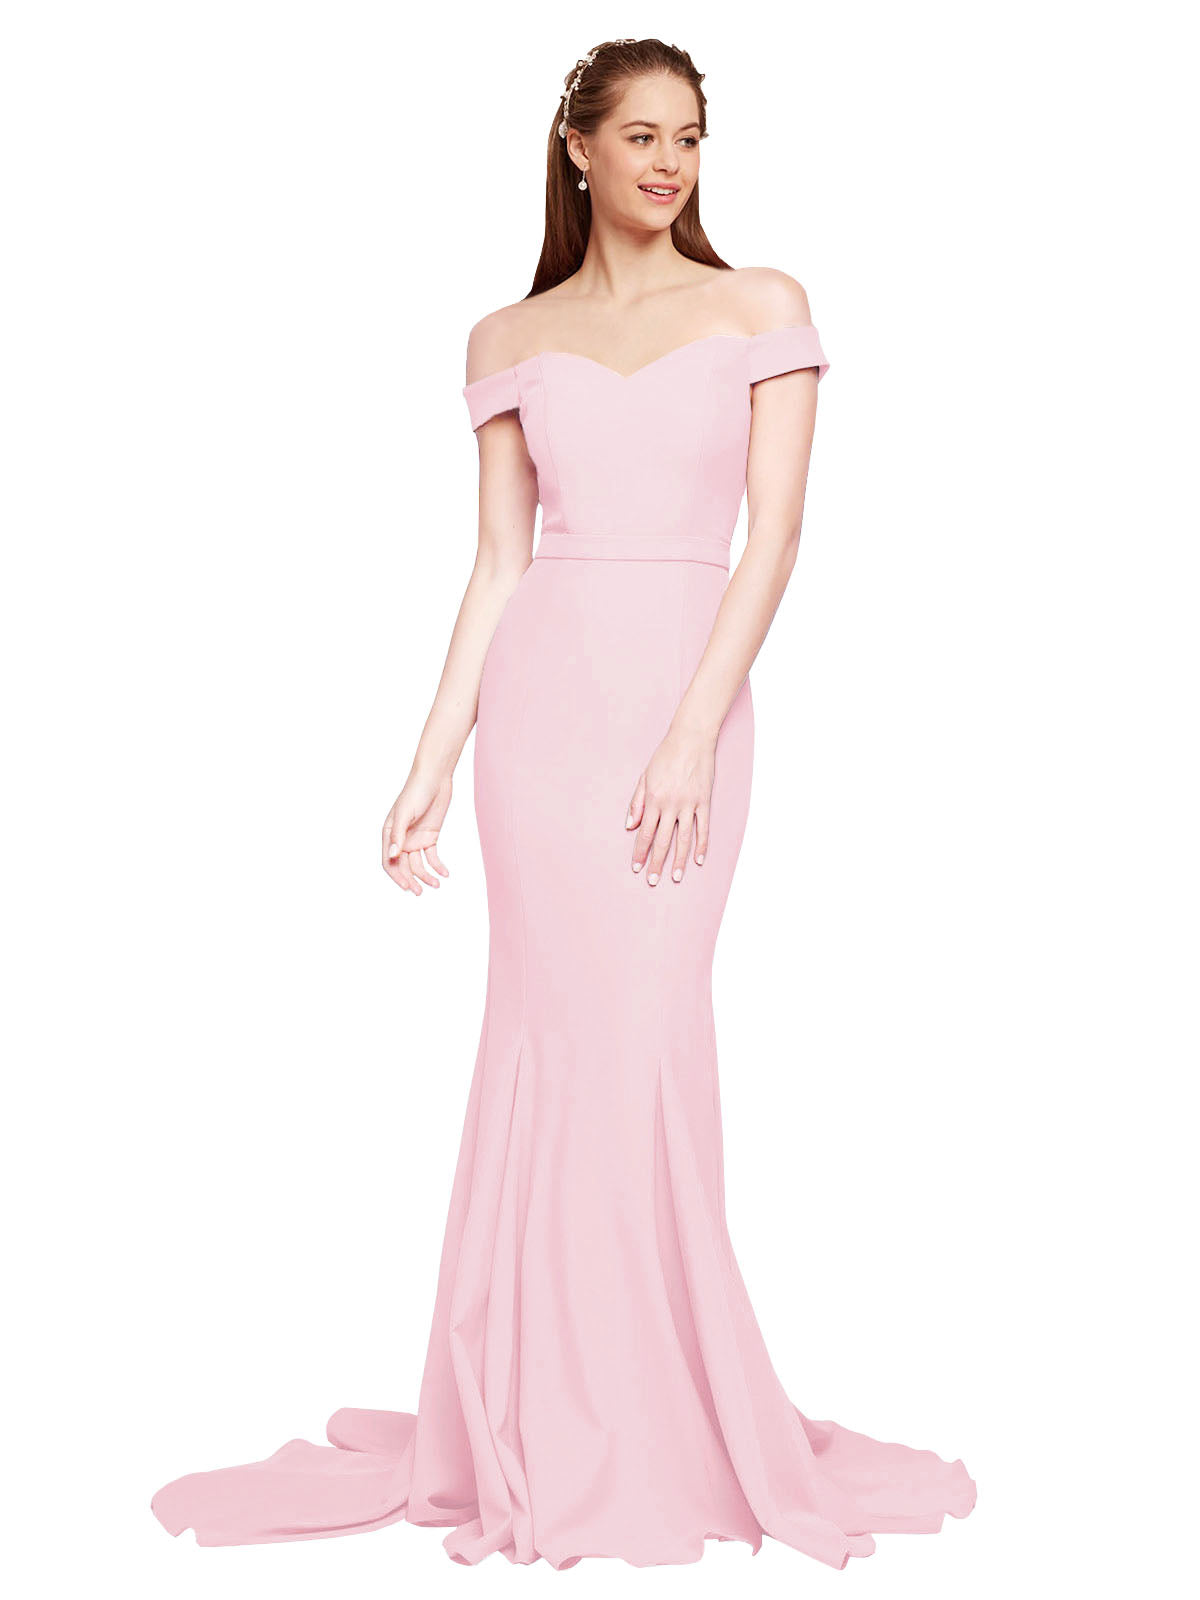 RightBrides Jannet Long Mermaid Off the Shoulder Sweetheart Sweep Train Floor Length Sleeveless Ice Pink Stretch Crepe Bridesmaid Dress